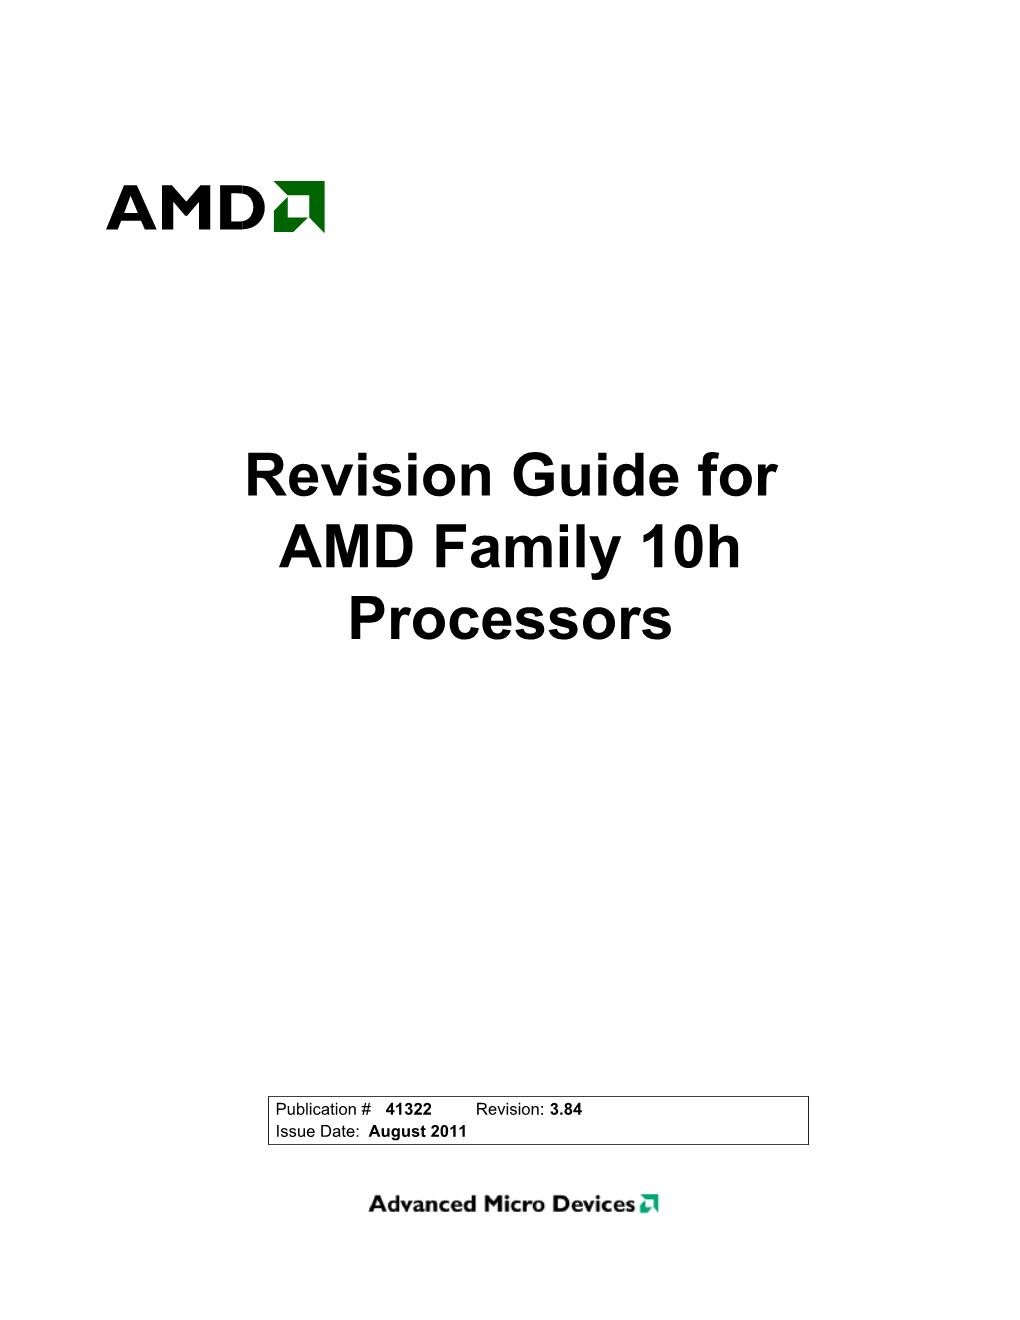 Revision Guide for AMD Family 10H Processors